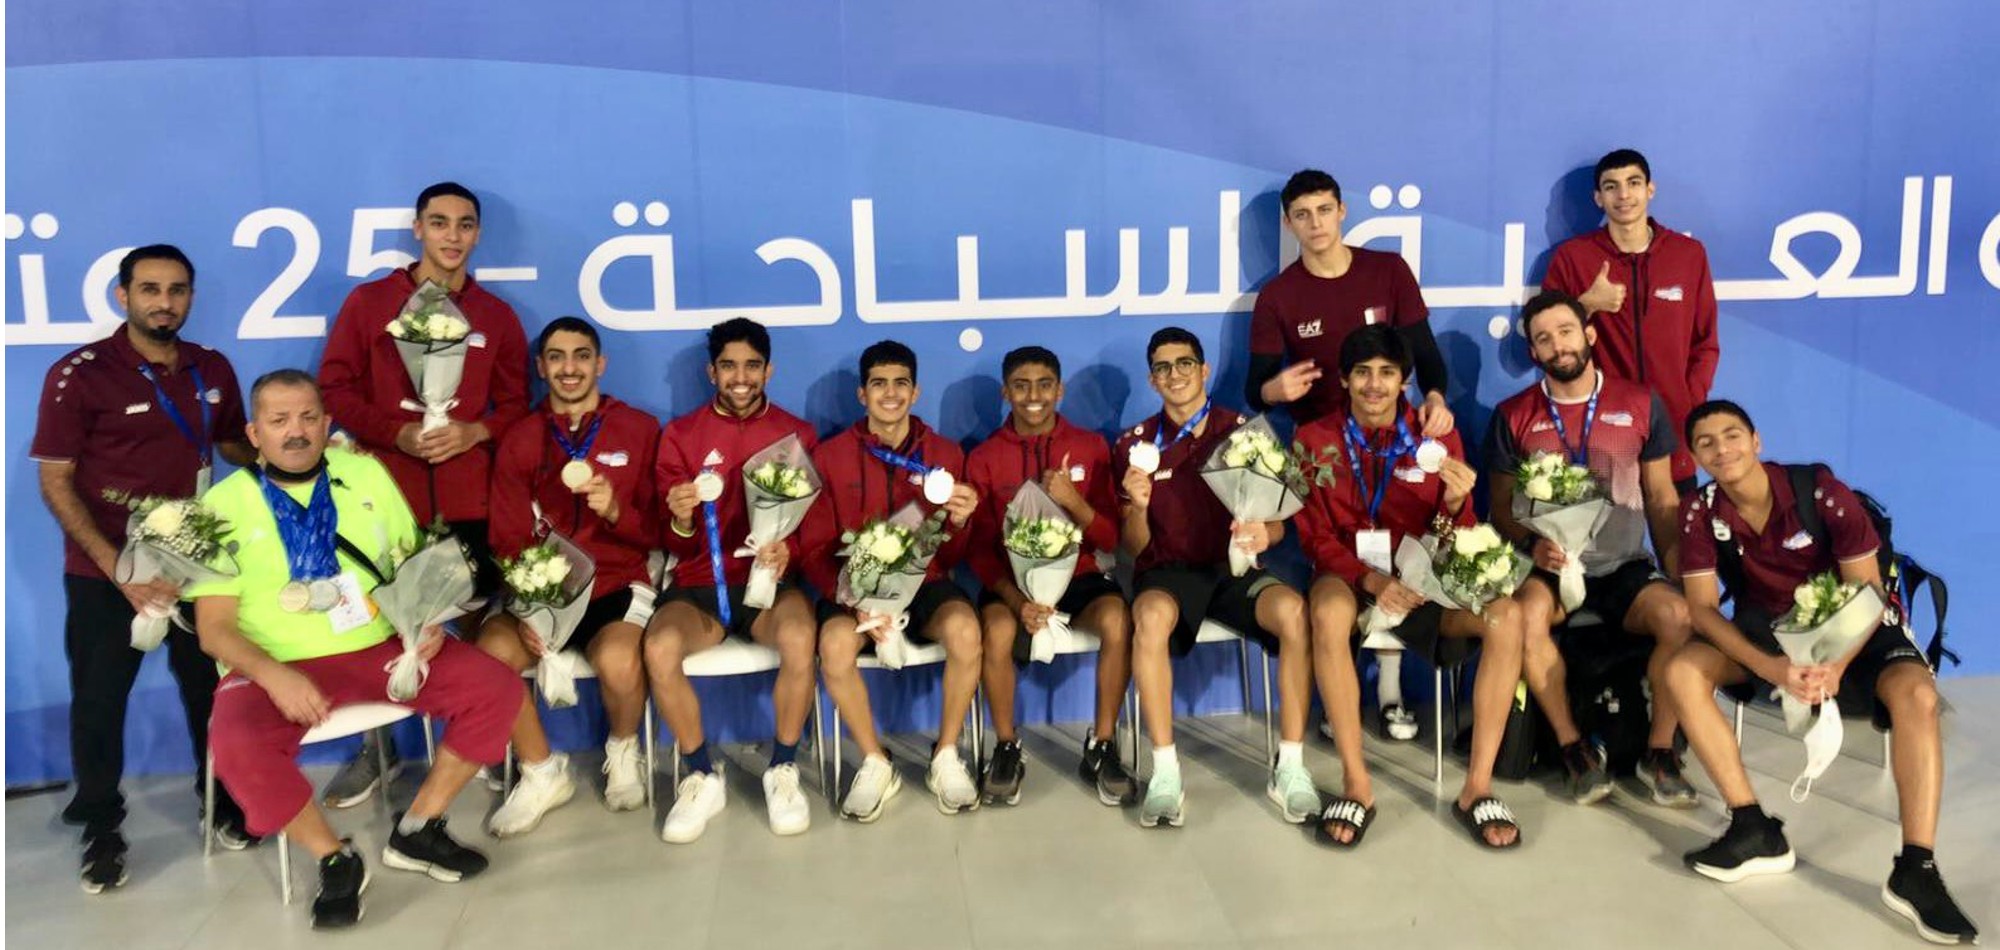 Qatar swimmers win 9 medals at Arab Championships in Abu Dhabi